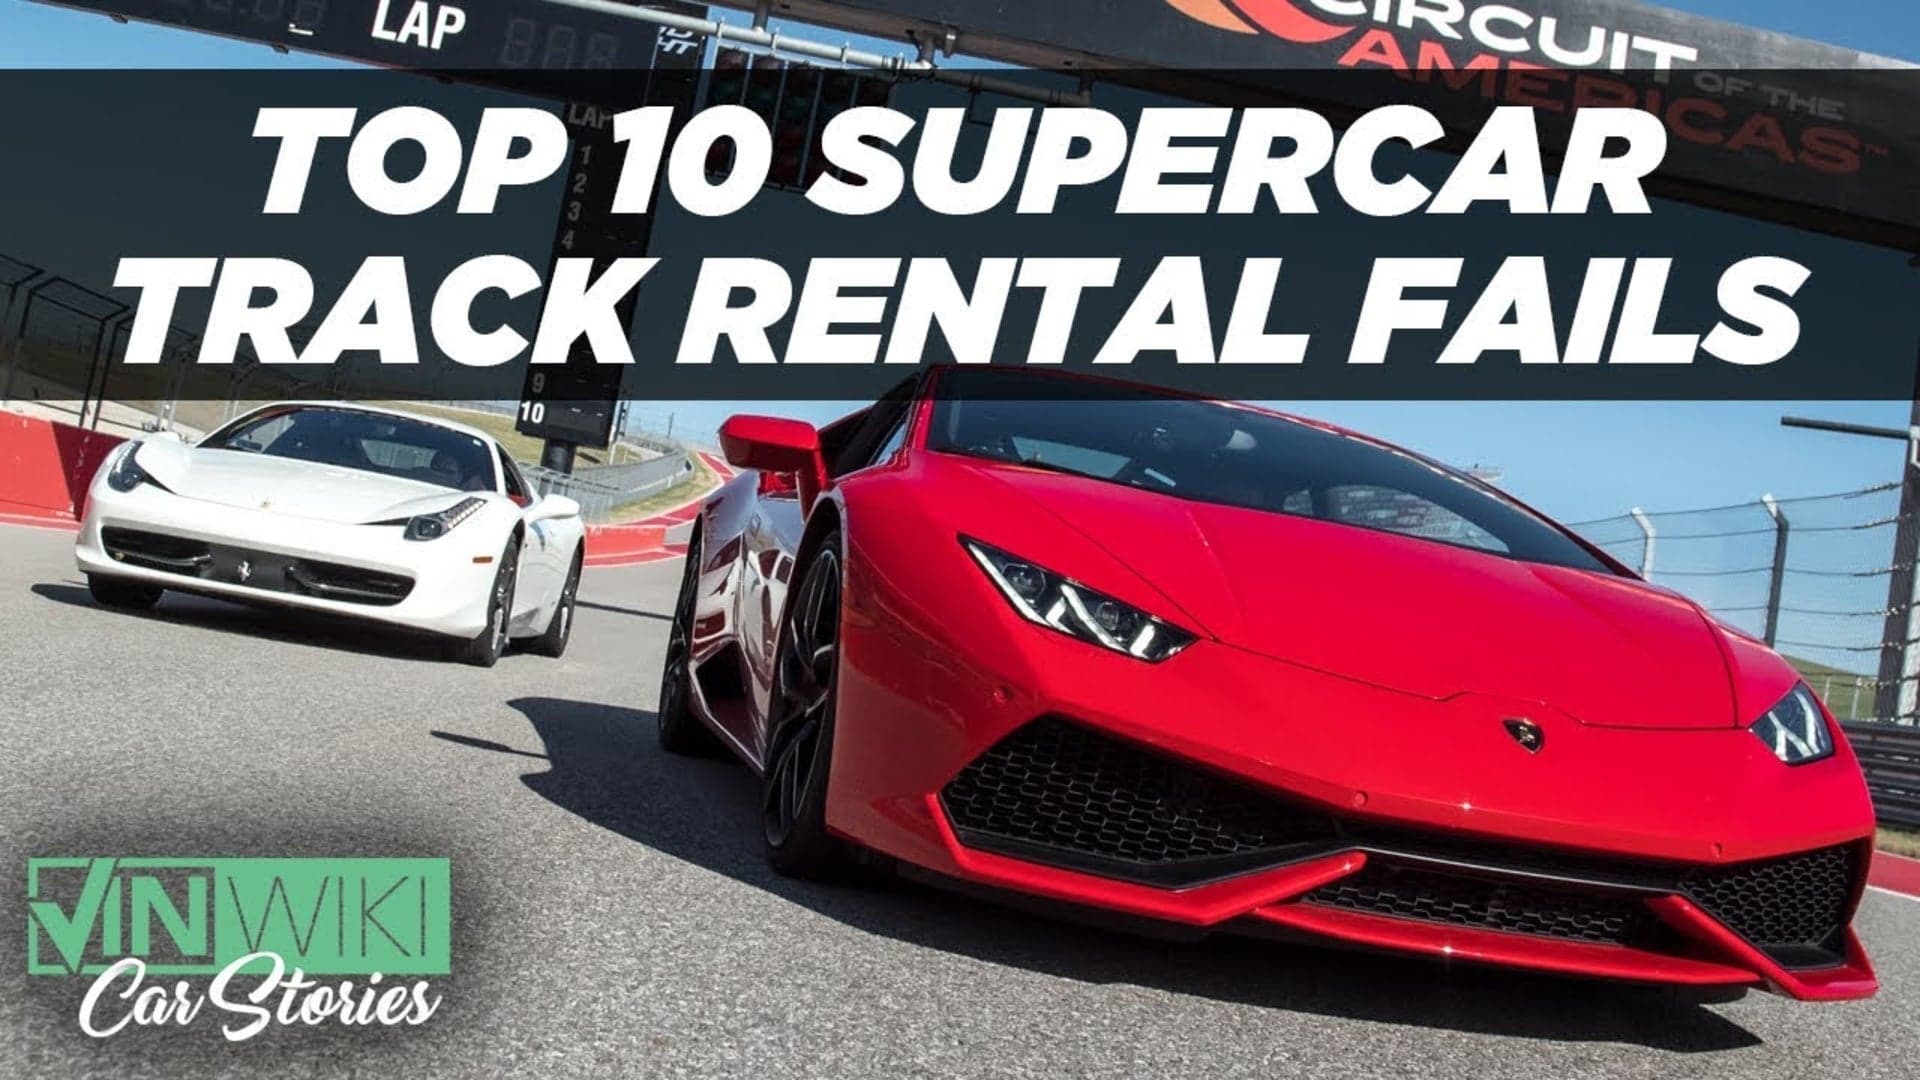 Check out the Top 10 Supercar Track Rental Fails